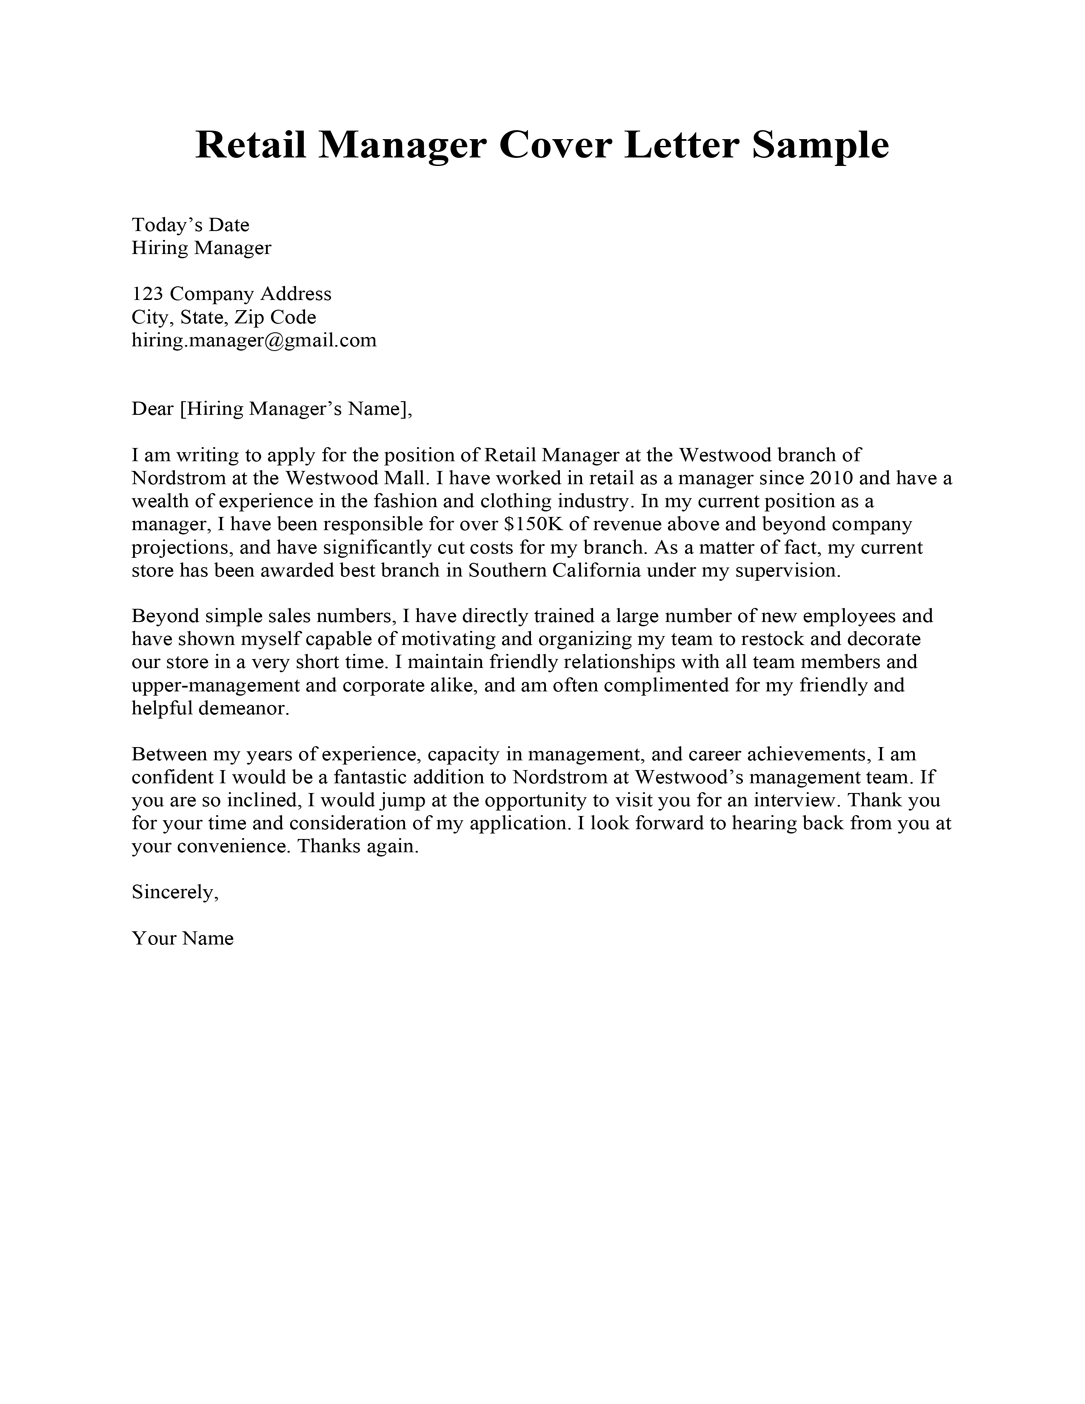 Simple Cover Letter Sample For Job Application from resumecompanion.com